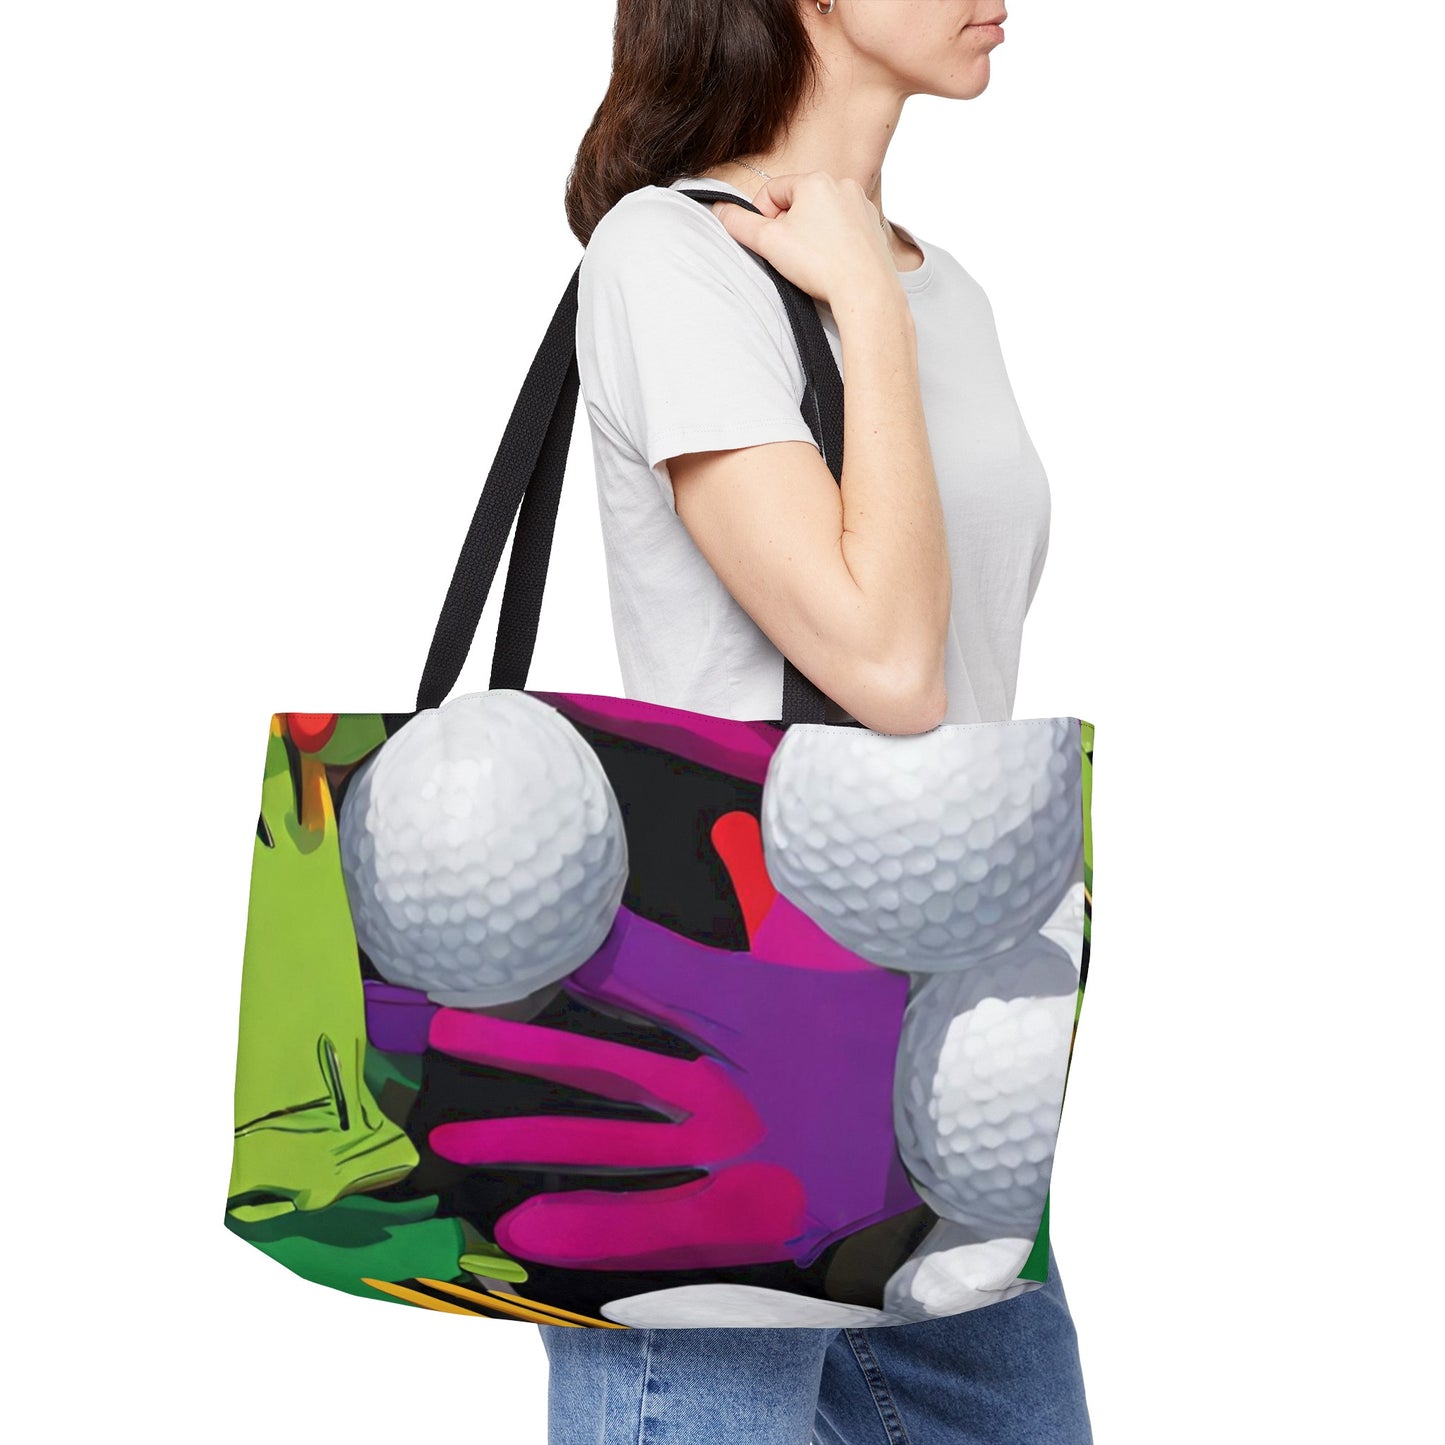 Tote Your Golf Accessories in Ultimate Style